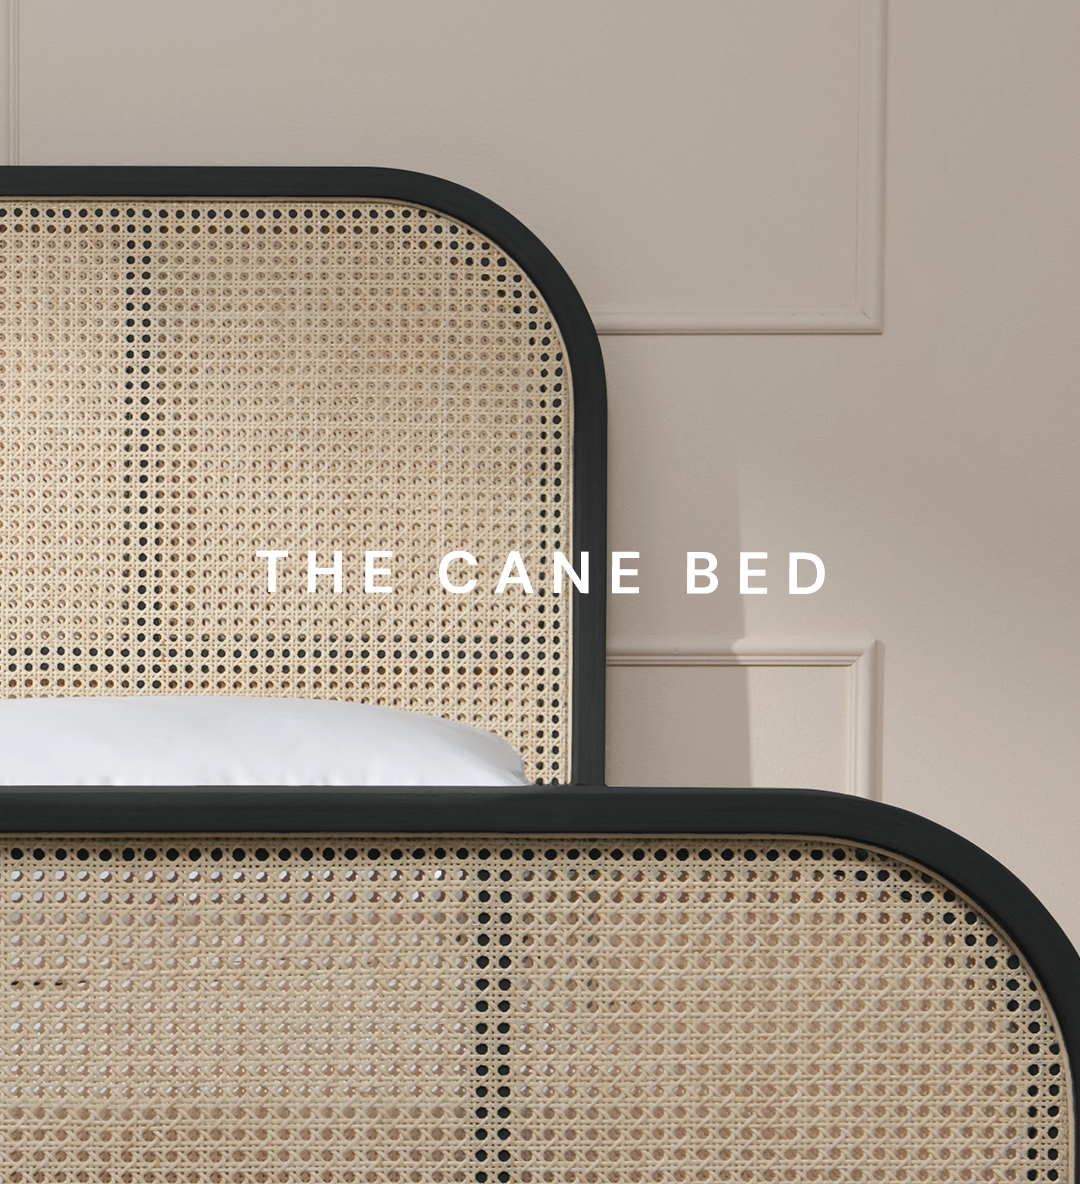 The Cane Bed